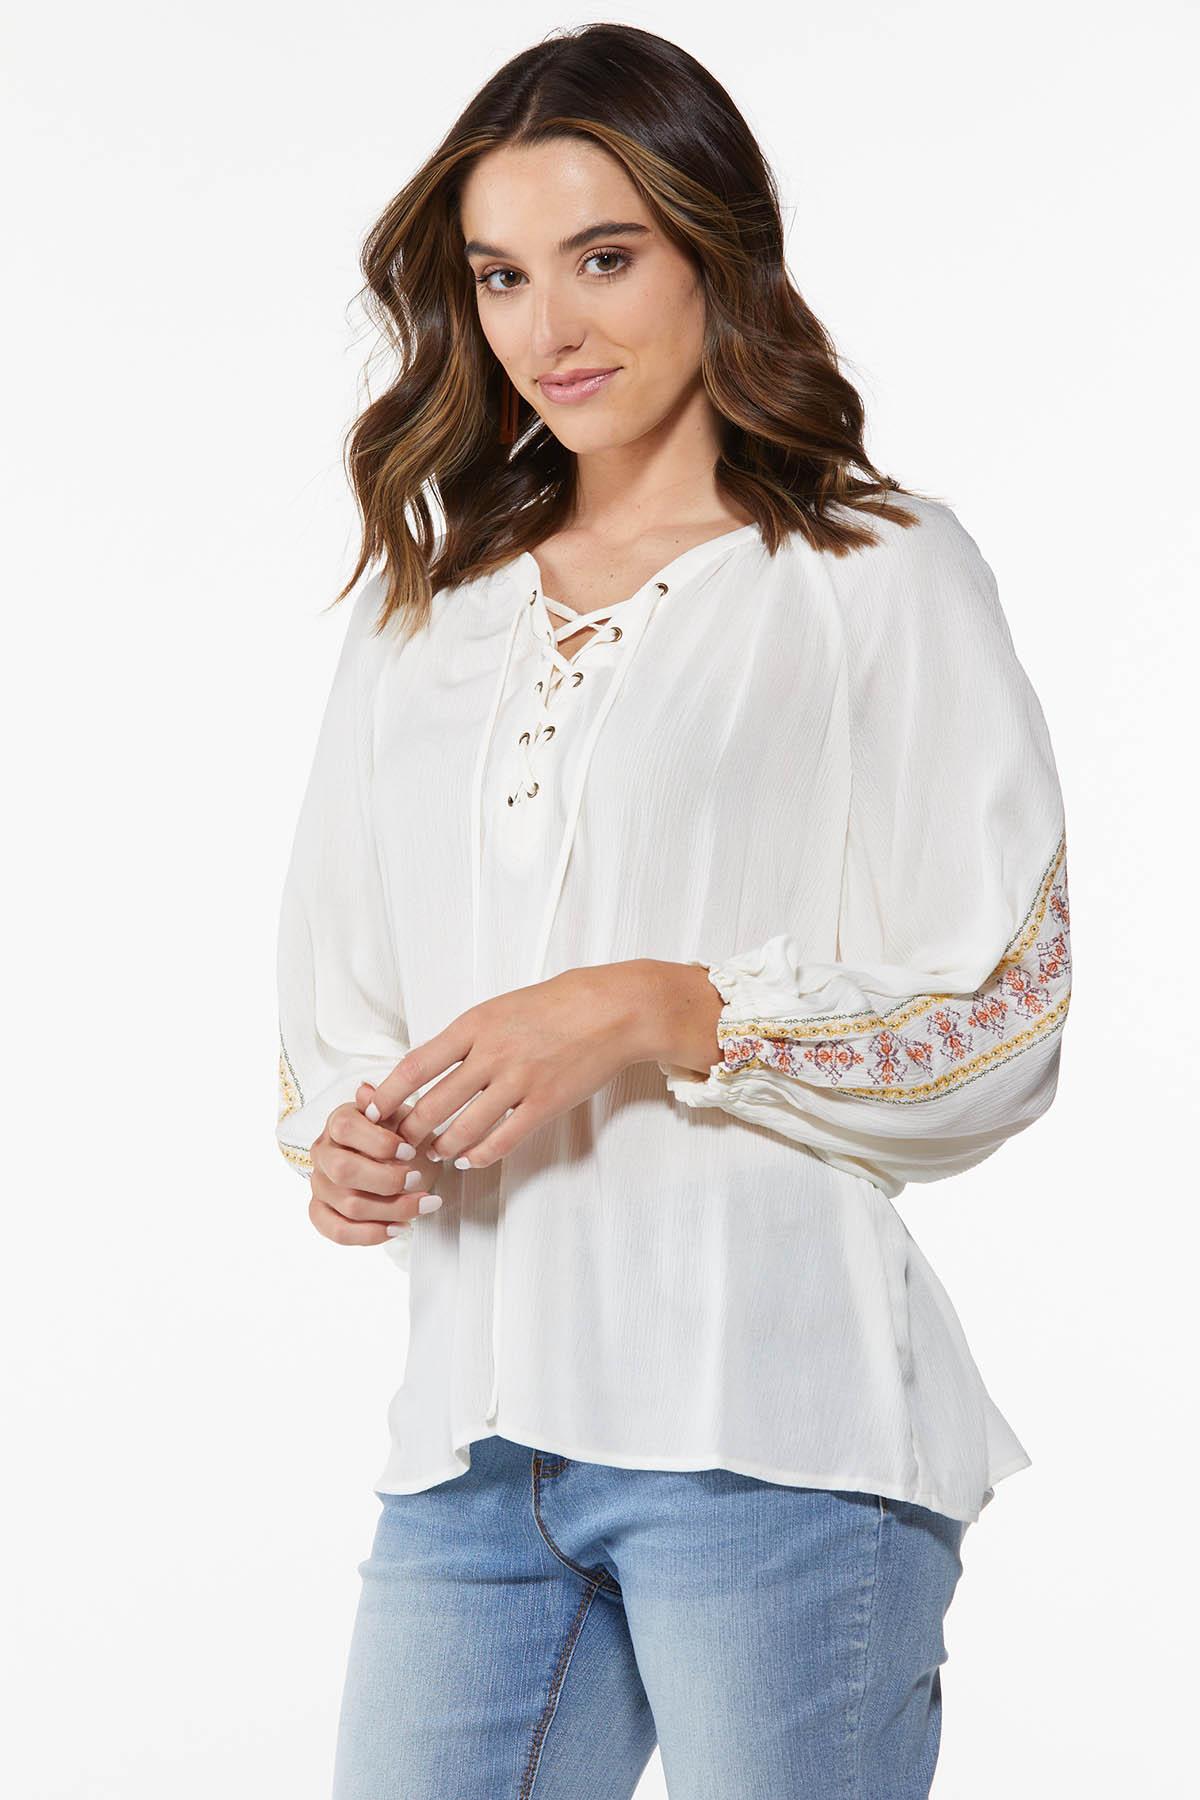 Lace-Up Poet Top